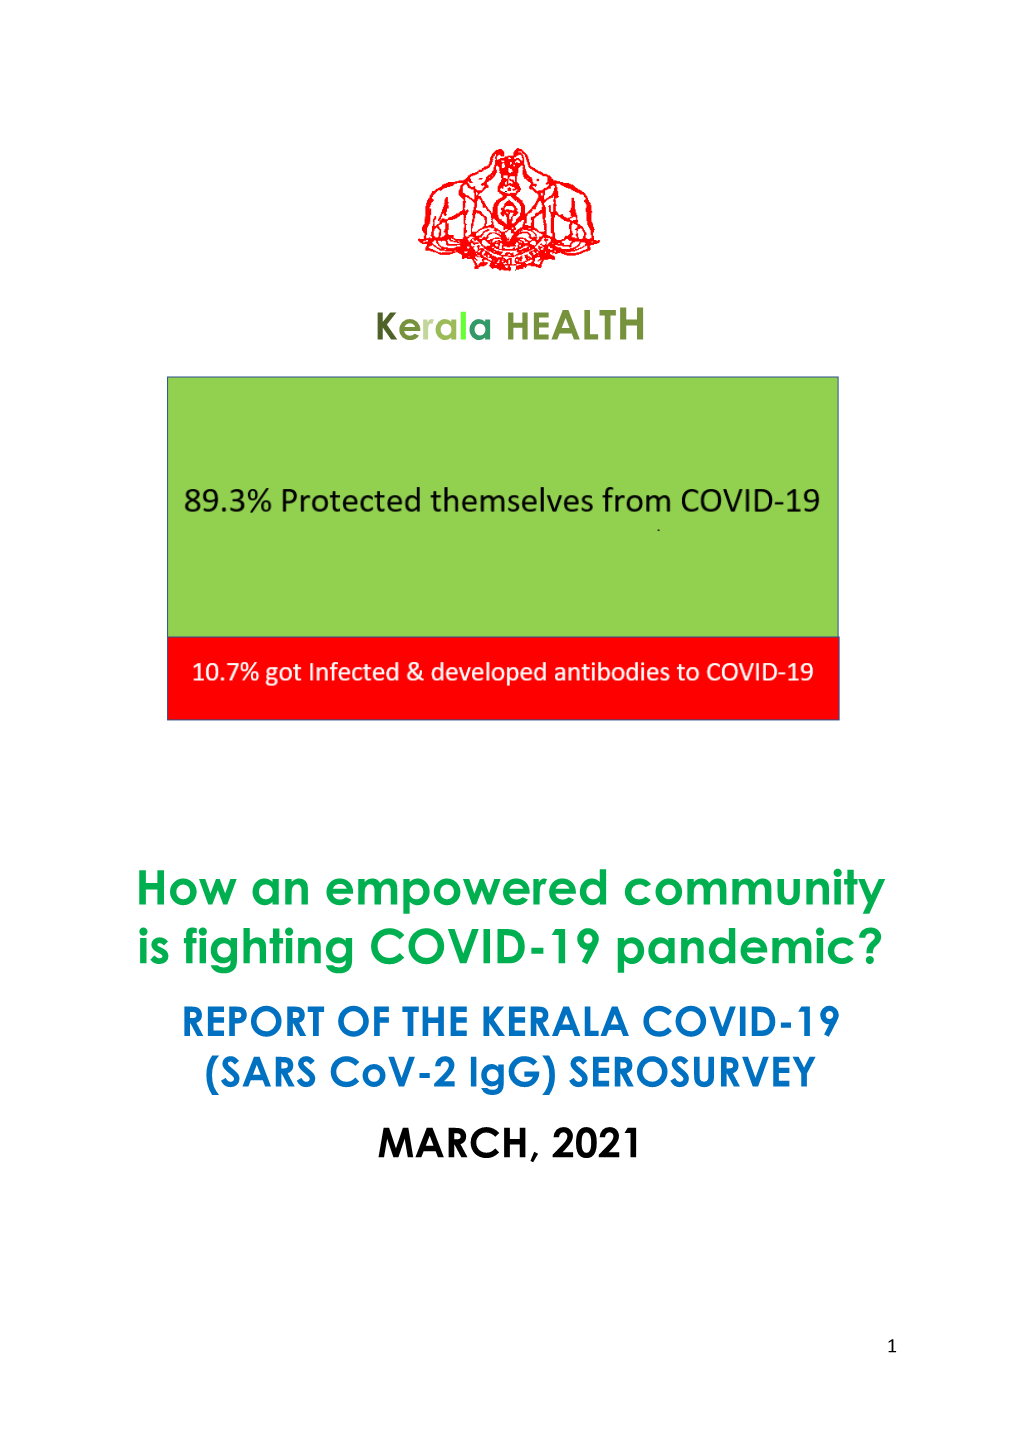 How an Empowered Community Is Fighting COVID-19 Pandemic? REPORT of the KERALA COVID-19 (SARS Cov-2 Igg) SEROSURVEY MARCH, 2021